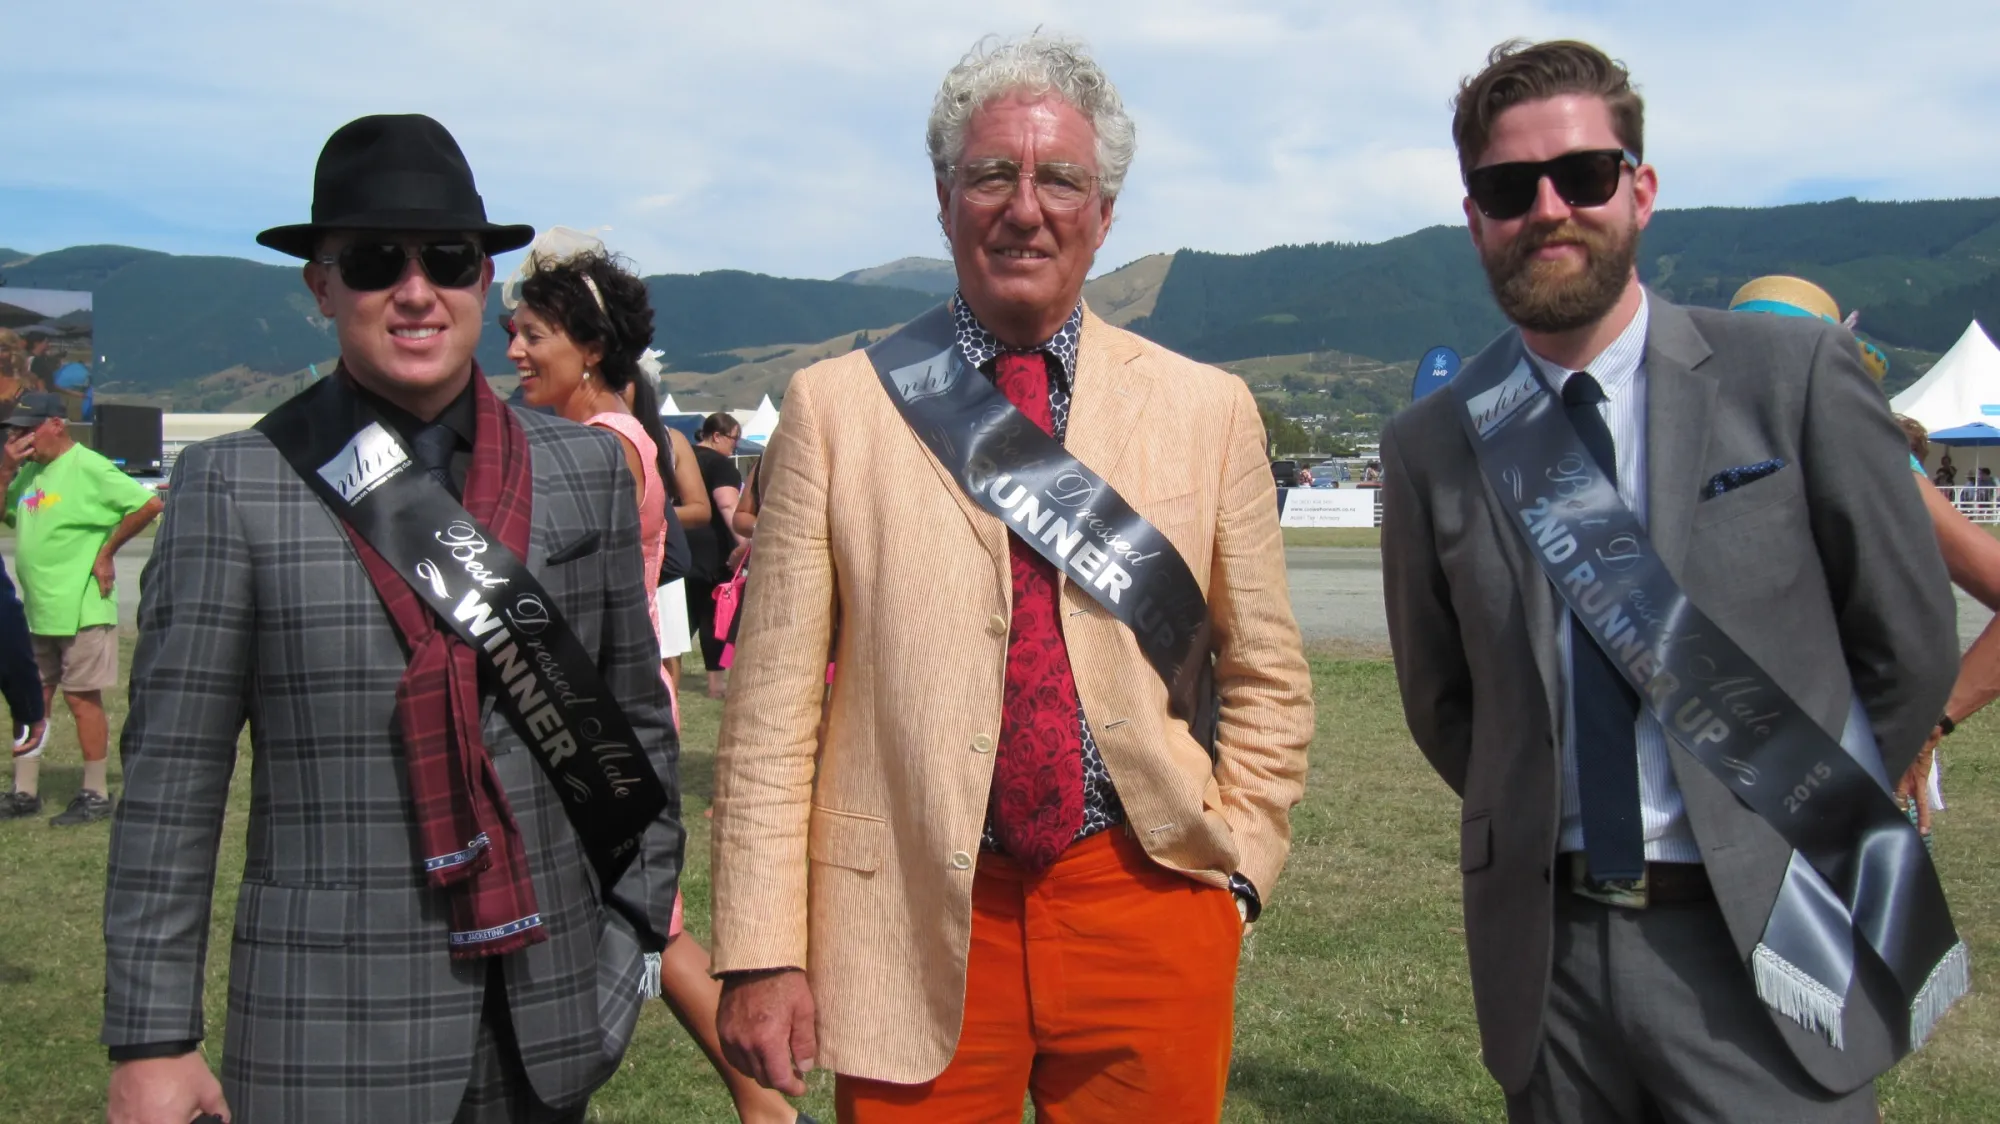 Nelson Harness Races Fashion in the Field 2015